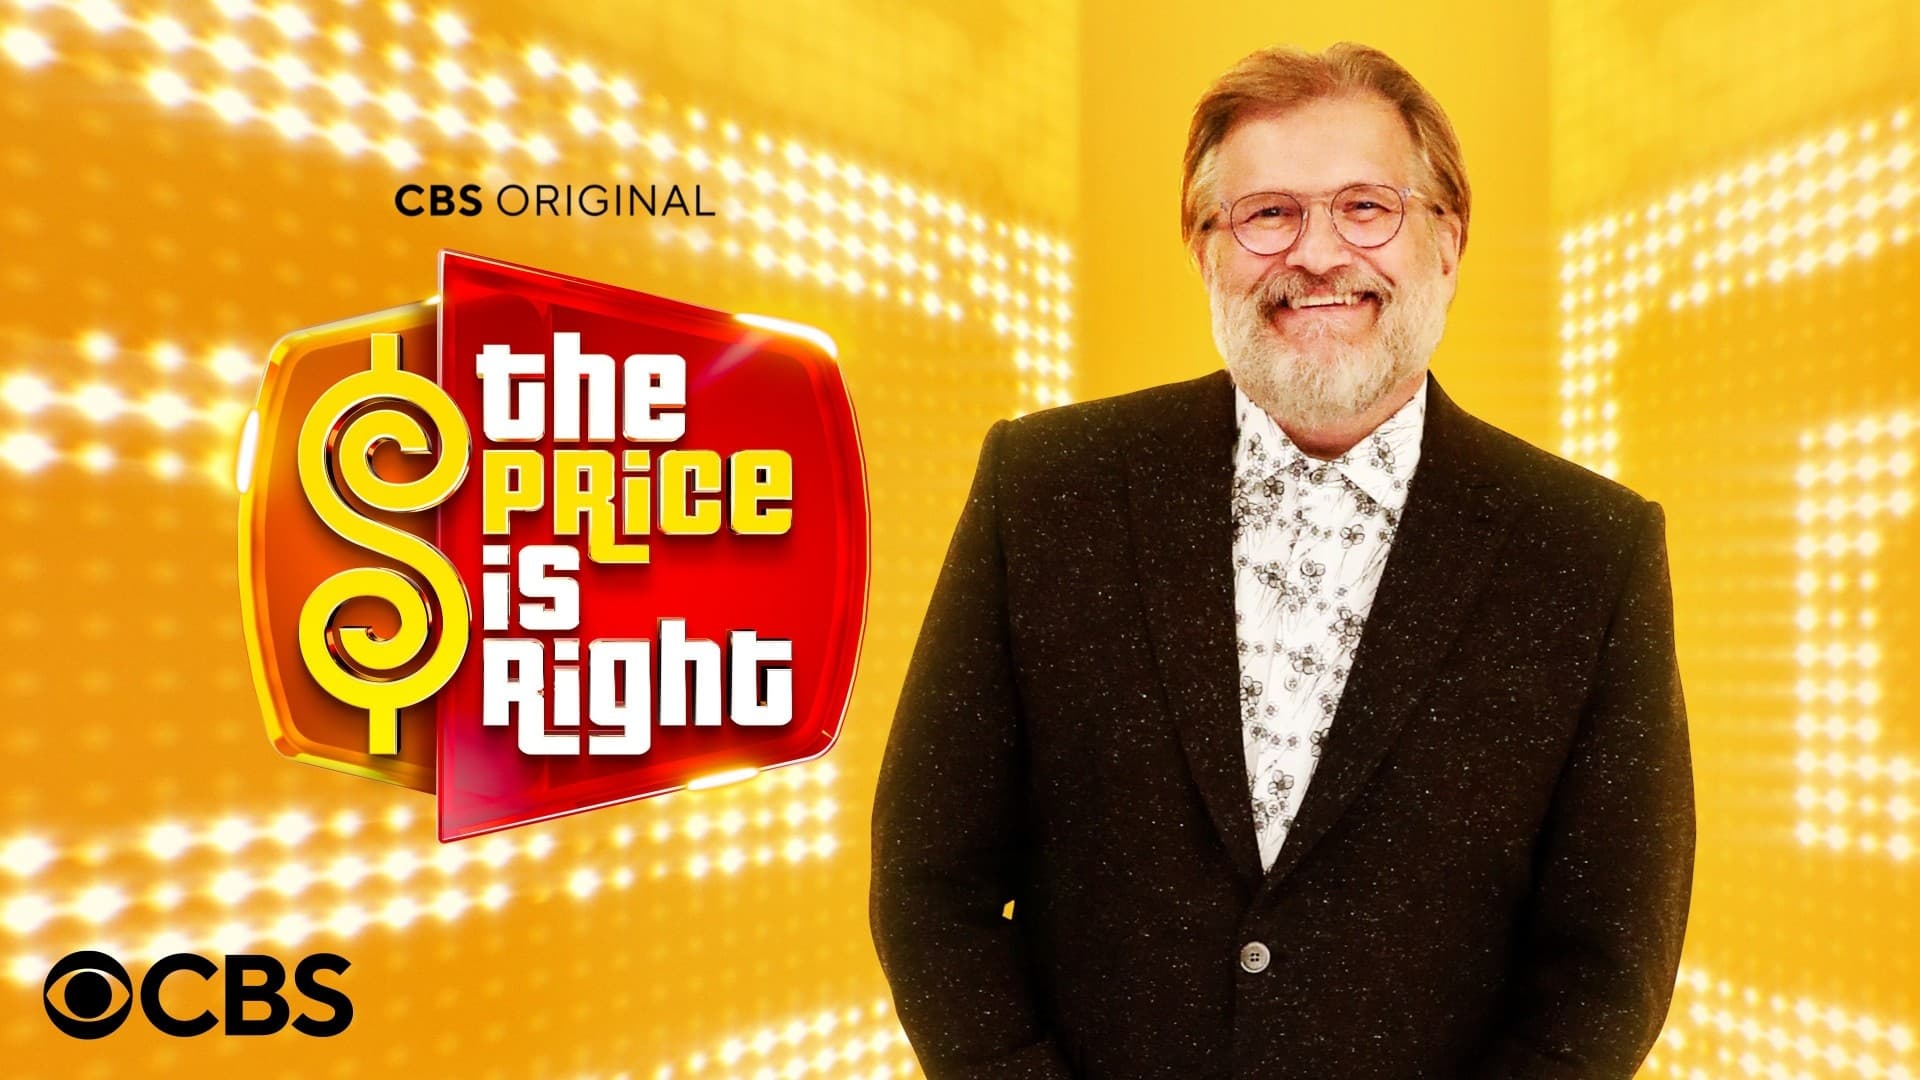 The Price Is Right - Season 36 Episode 98 : The Price Is Right Season 36 Episode 98